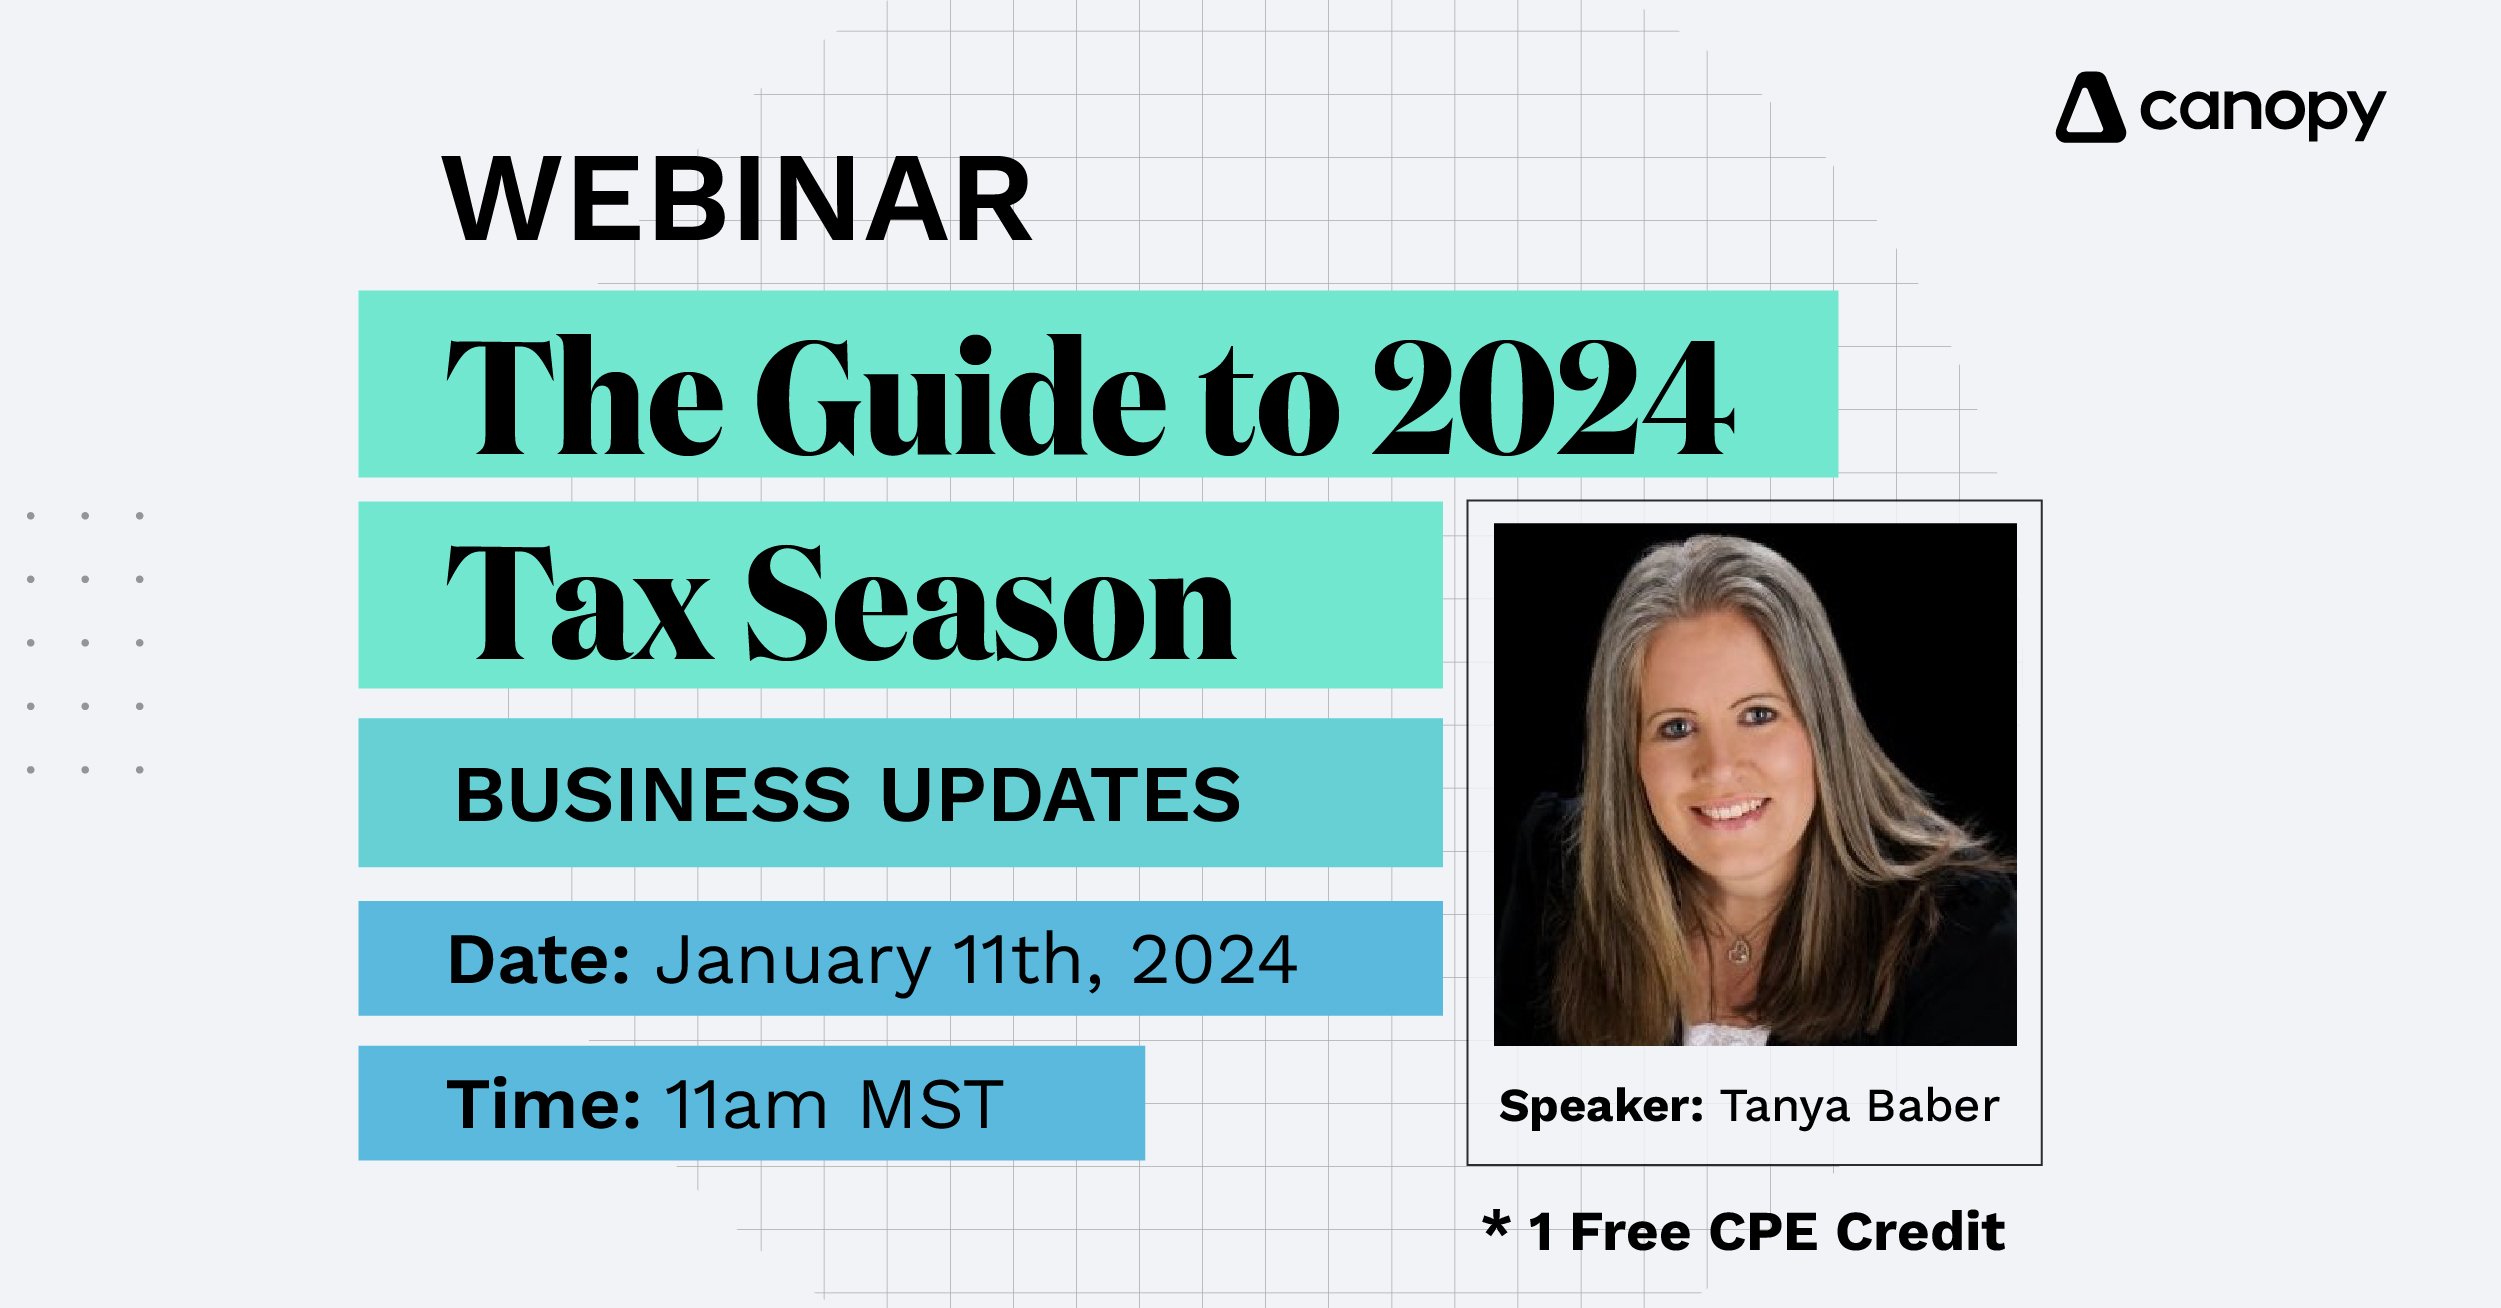 The Guide to 2024 Tax Season Business Updates